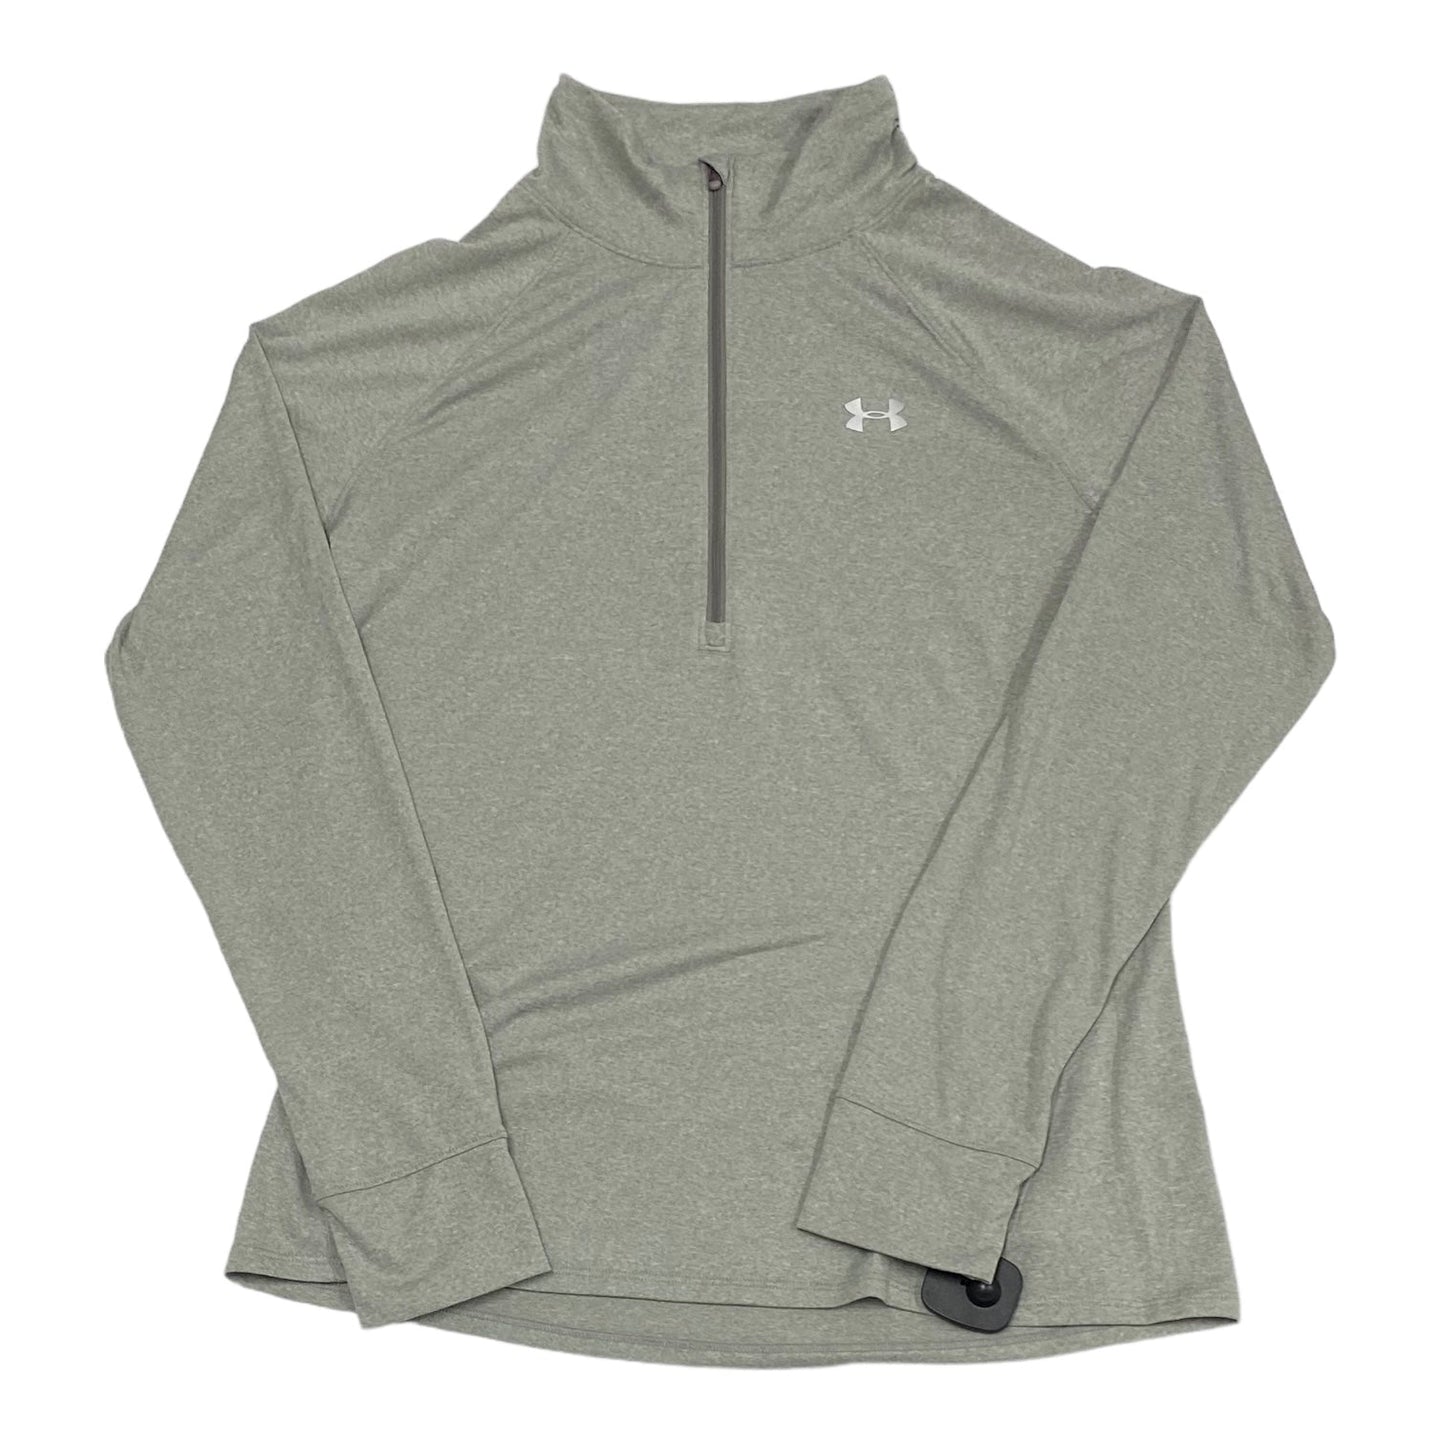 Grey Athletic Top Long Sleeve Collar Under Armour, Size L